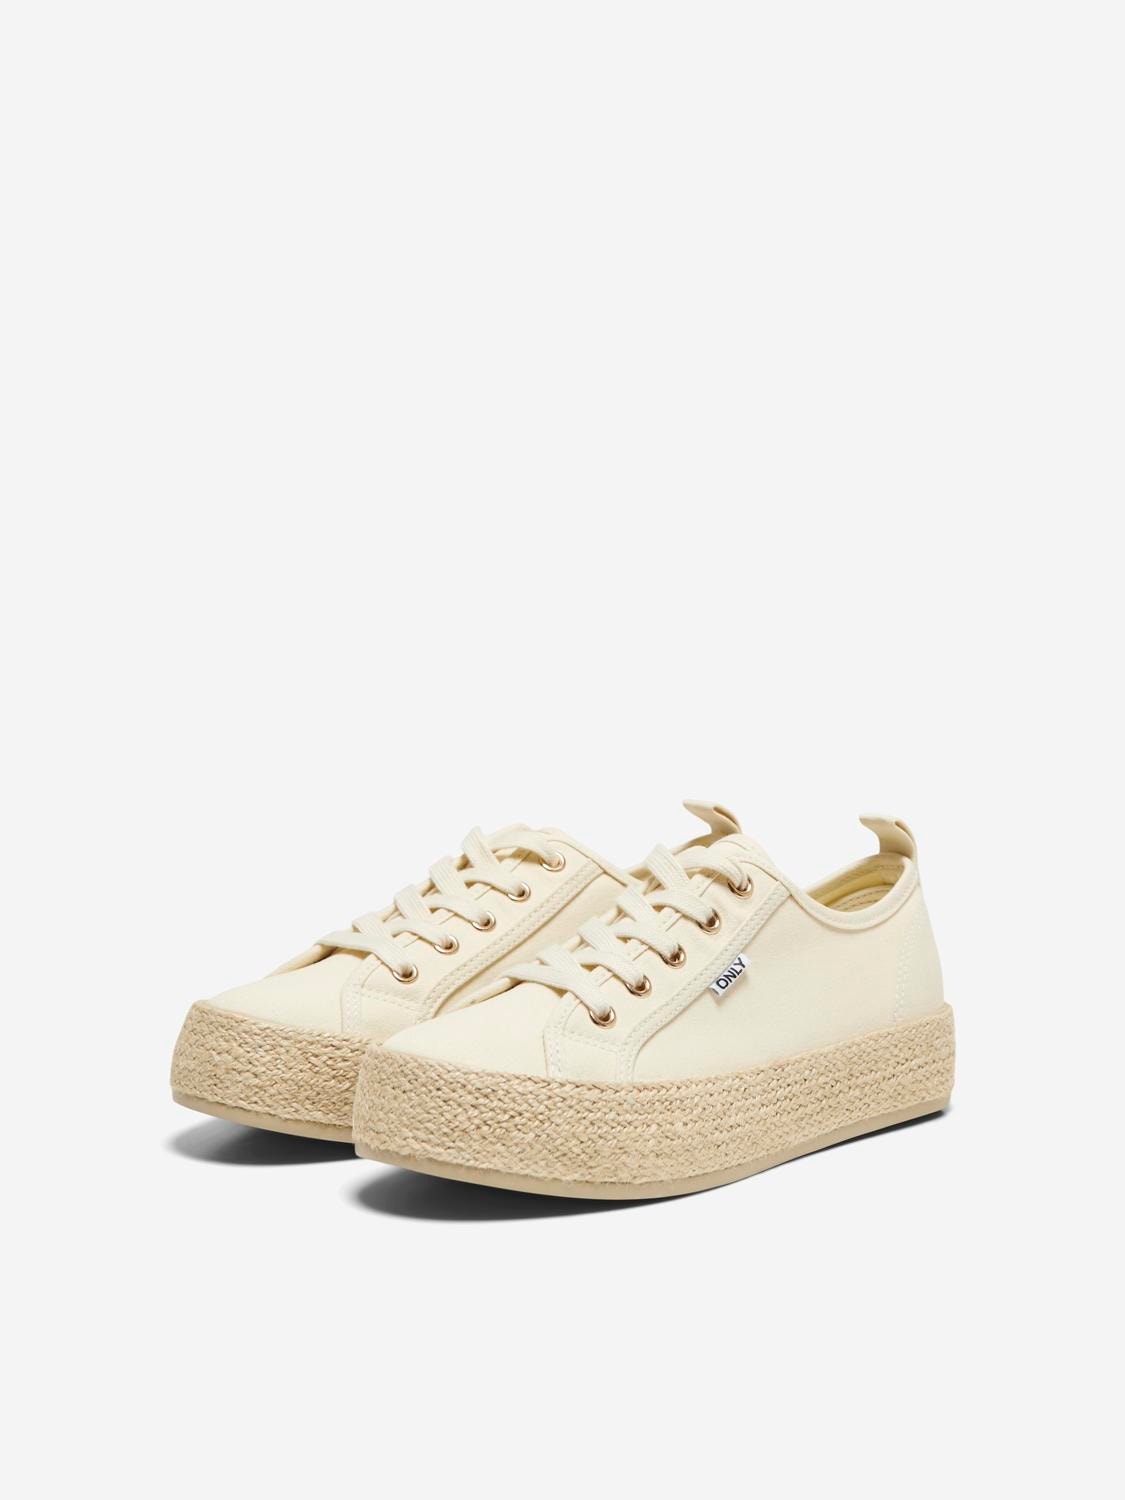 ONLY Espadrille sneakers -Creme - 15319621